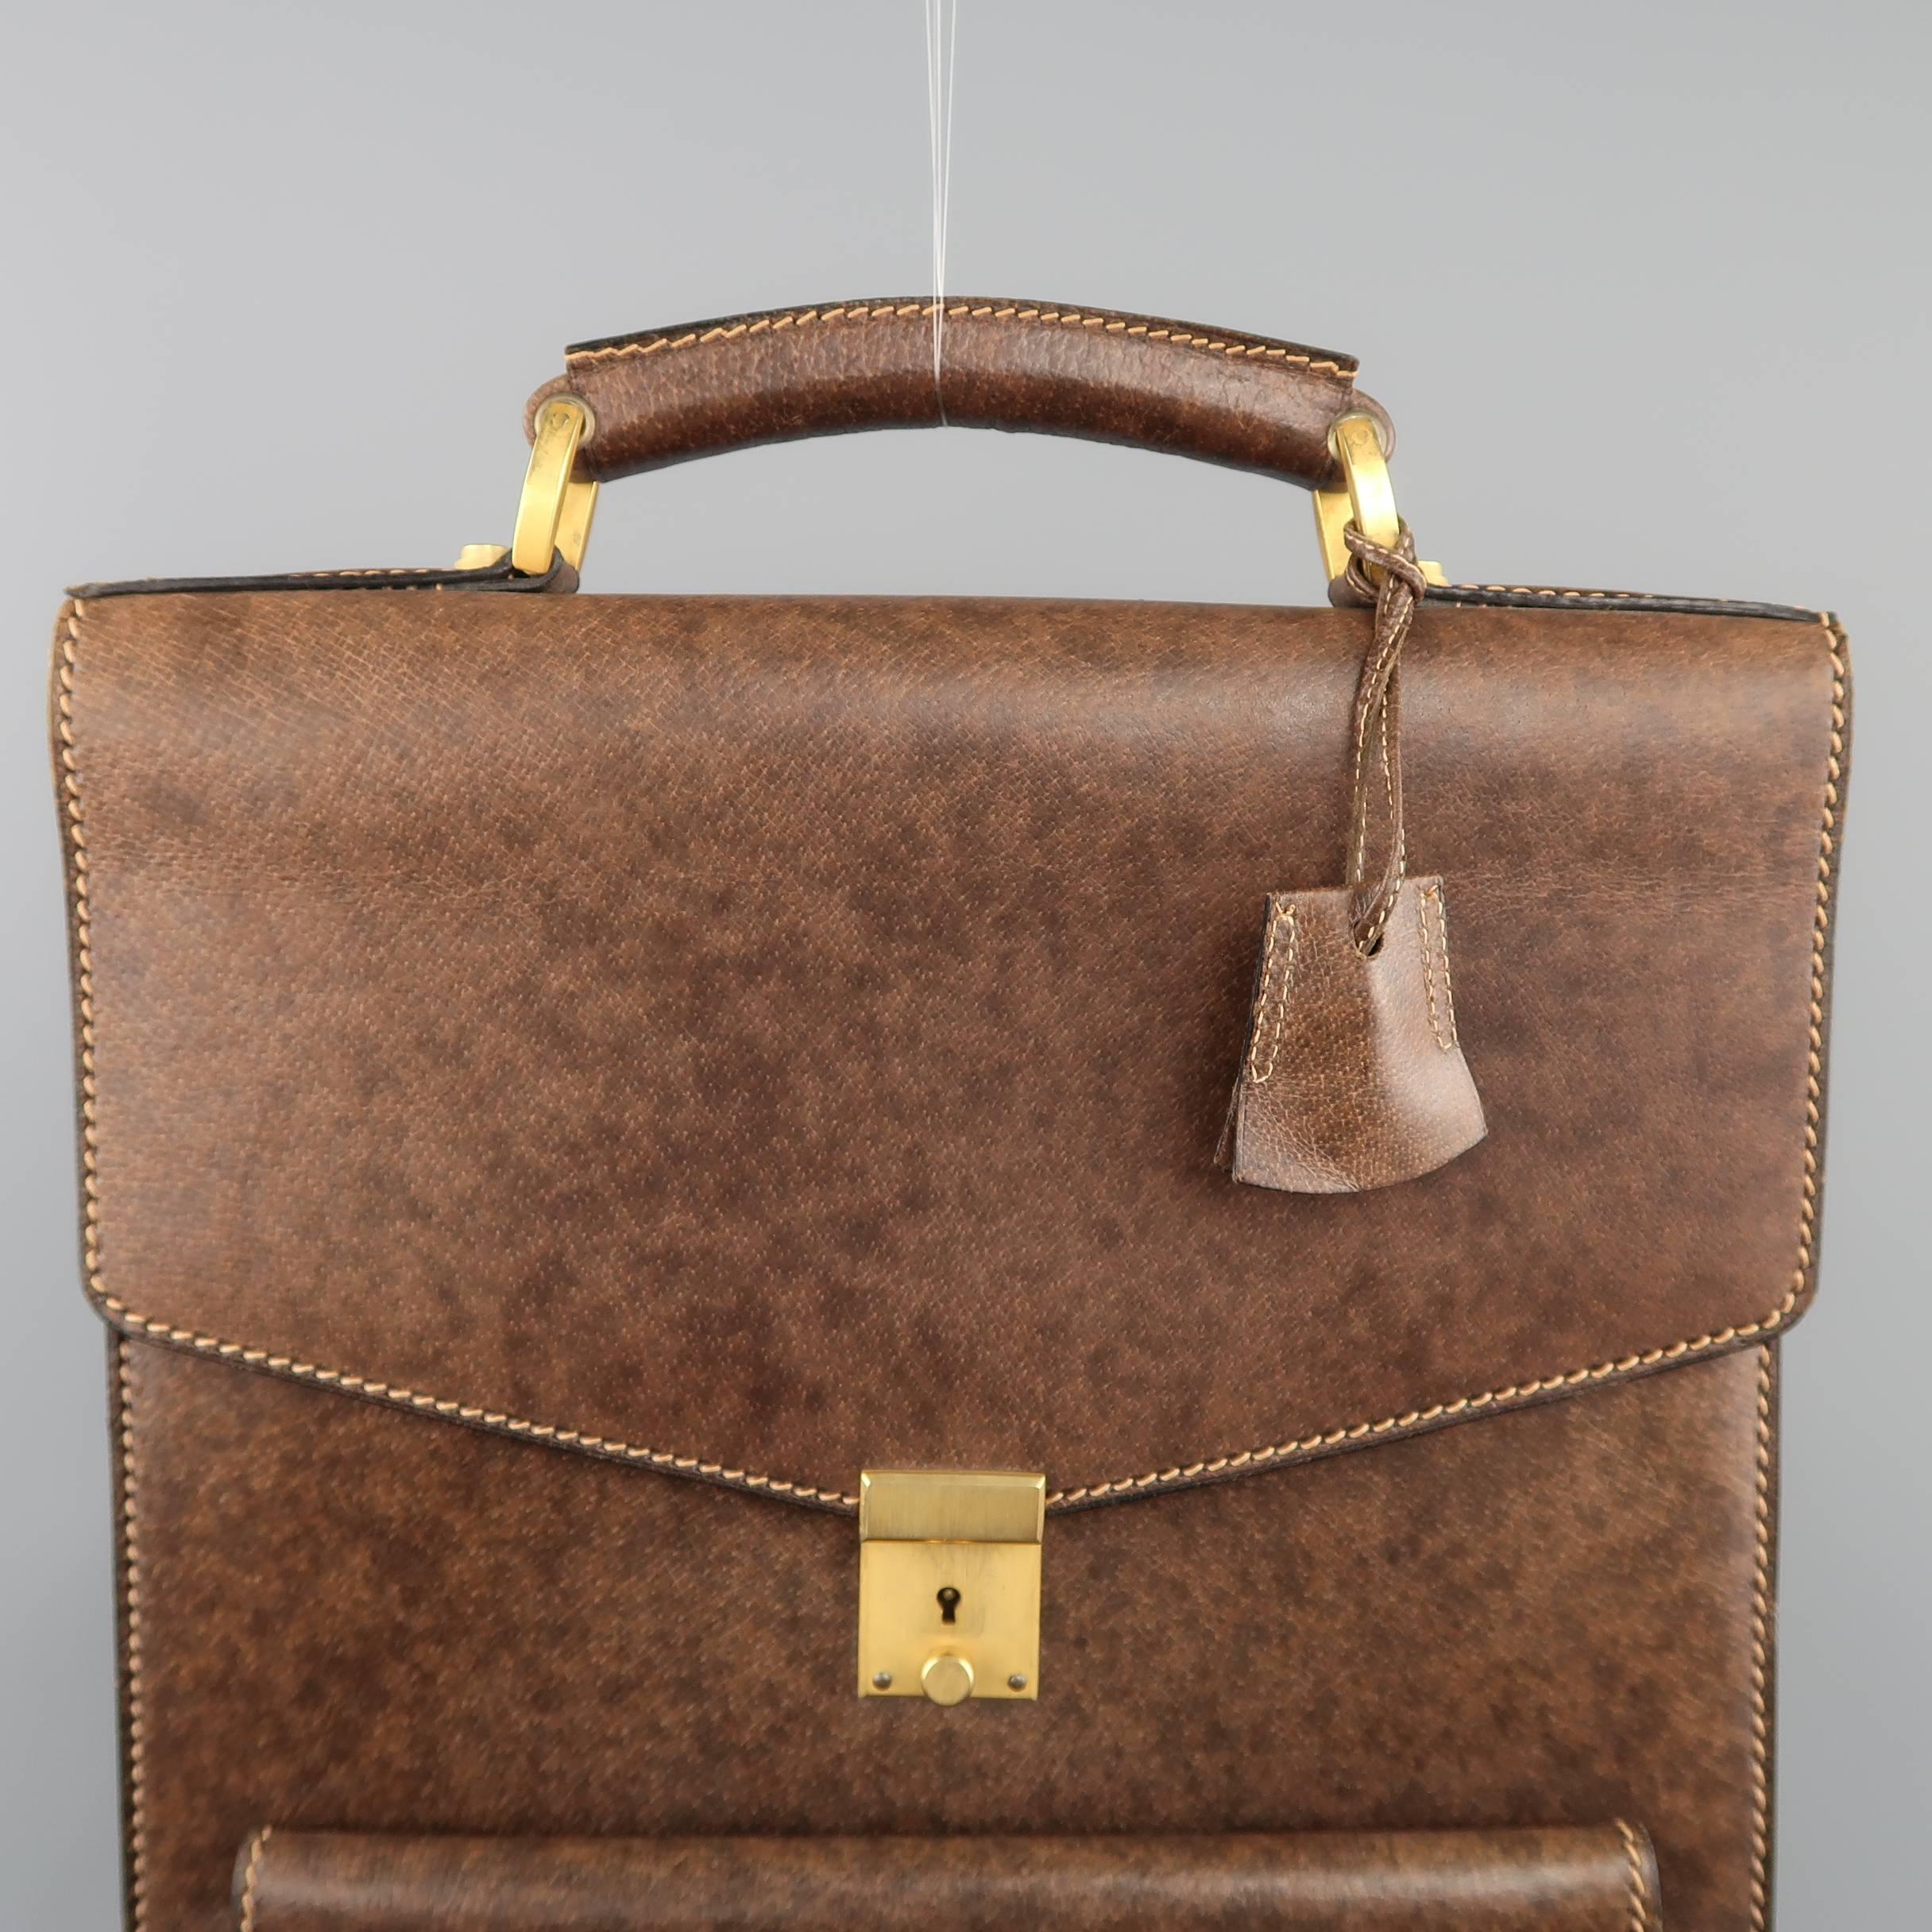 Vintage GUCCI briefcase comes in a brown marbled look leather and features a long, rectangular shaped accordion construction, frontal envelope pocket, double carry straps at the bottom, flap top closure with gold tone lock, covered top handle with